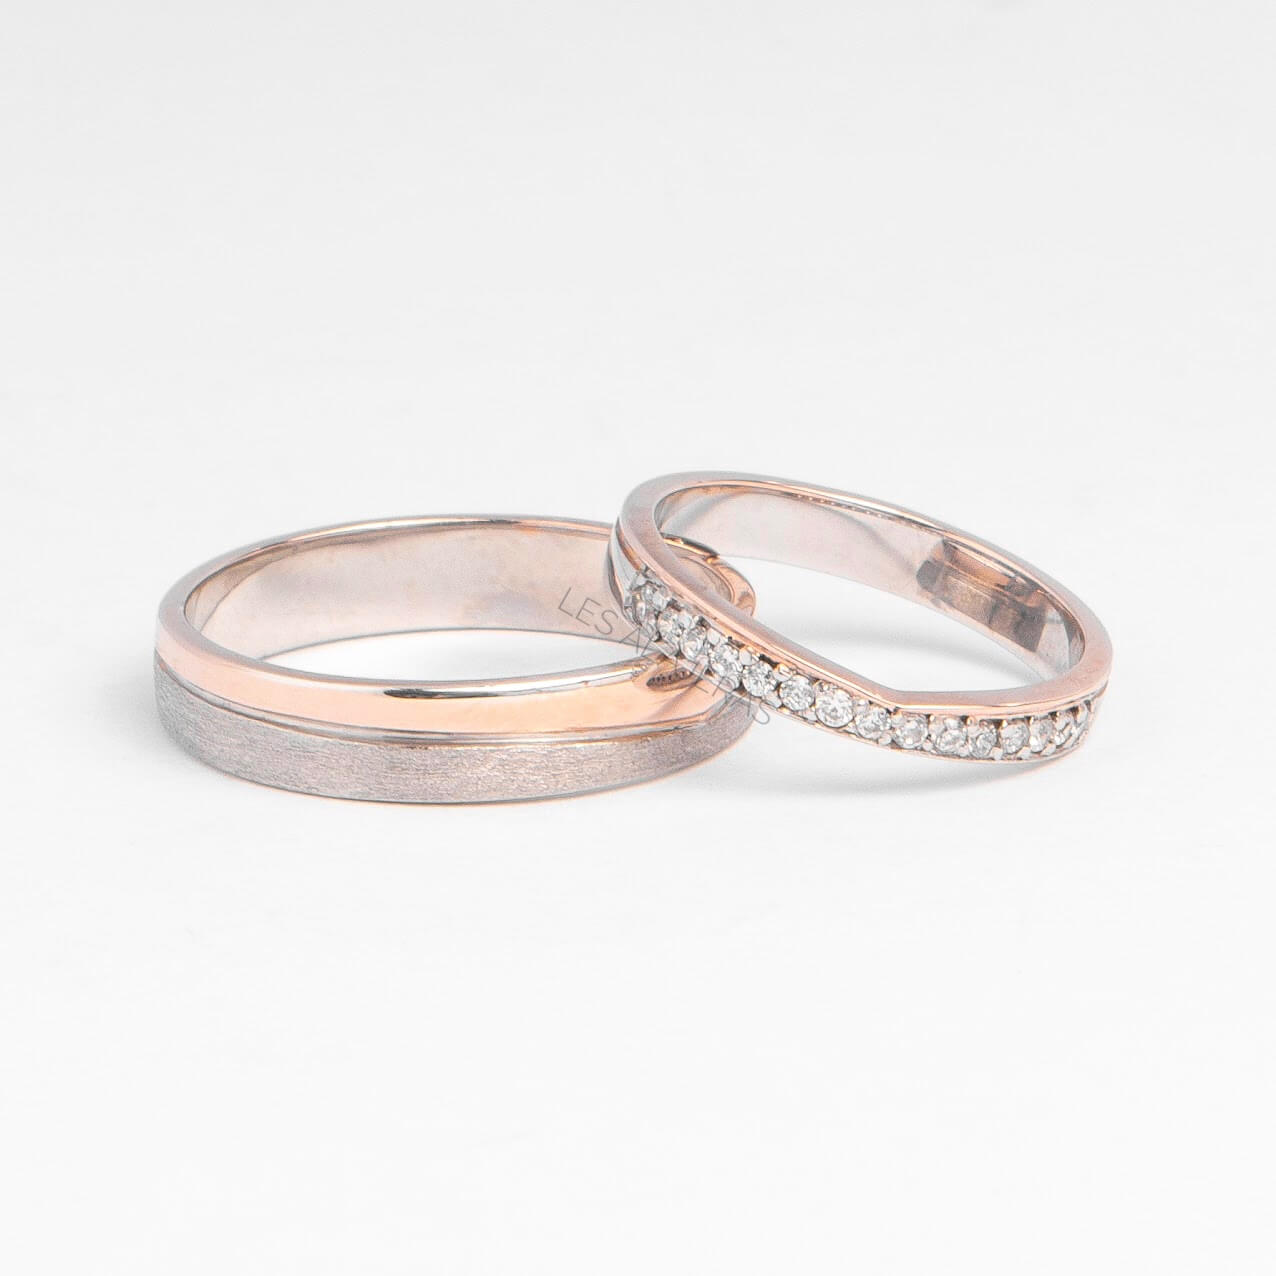 designed to perfectly stack and match with your protruding engagement ring, making the perfect classy-look.